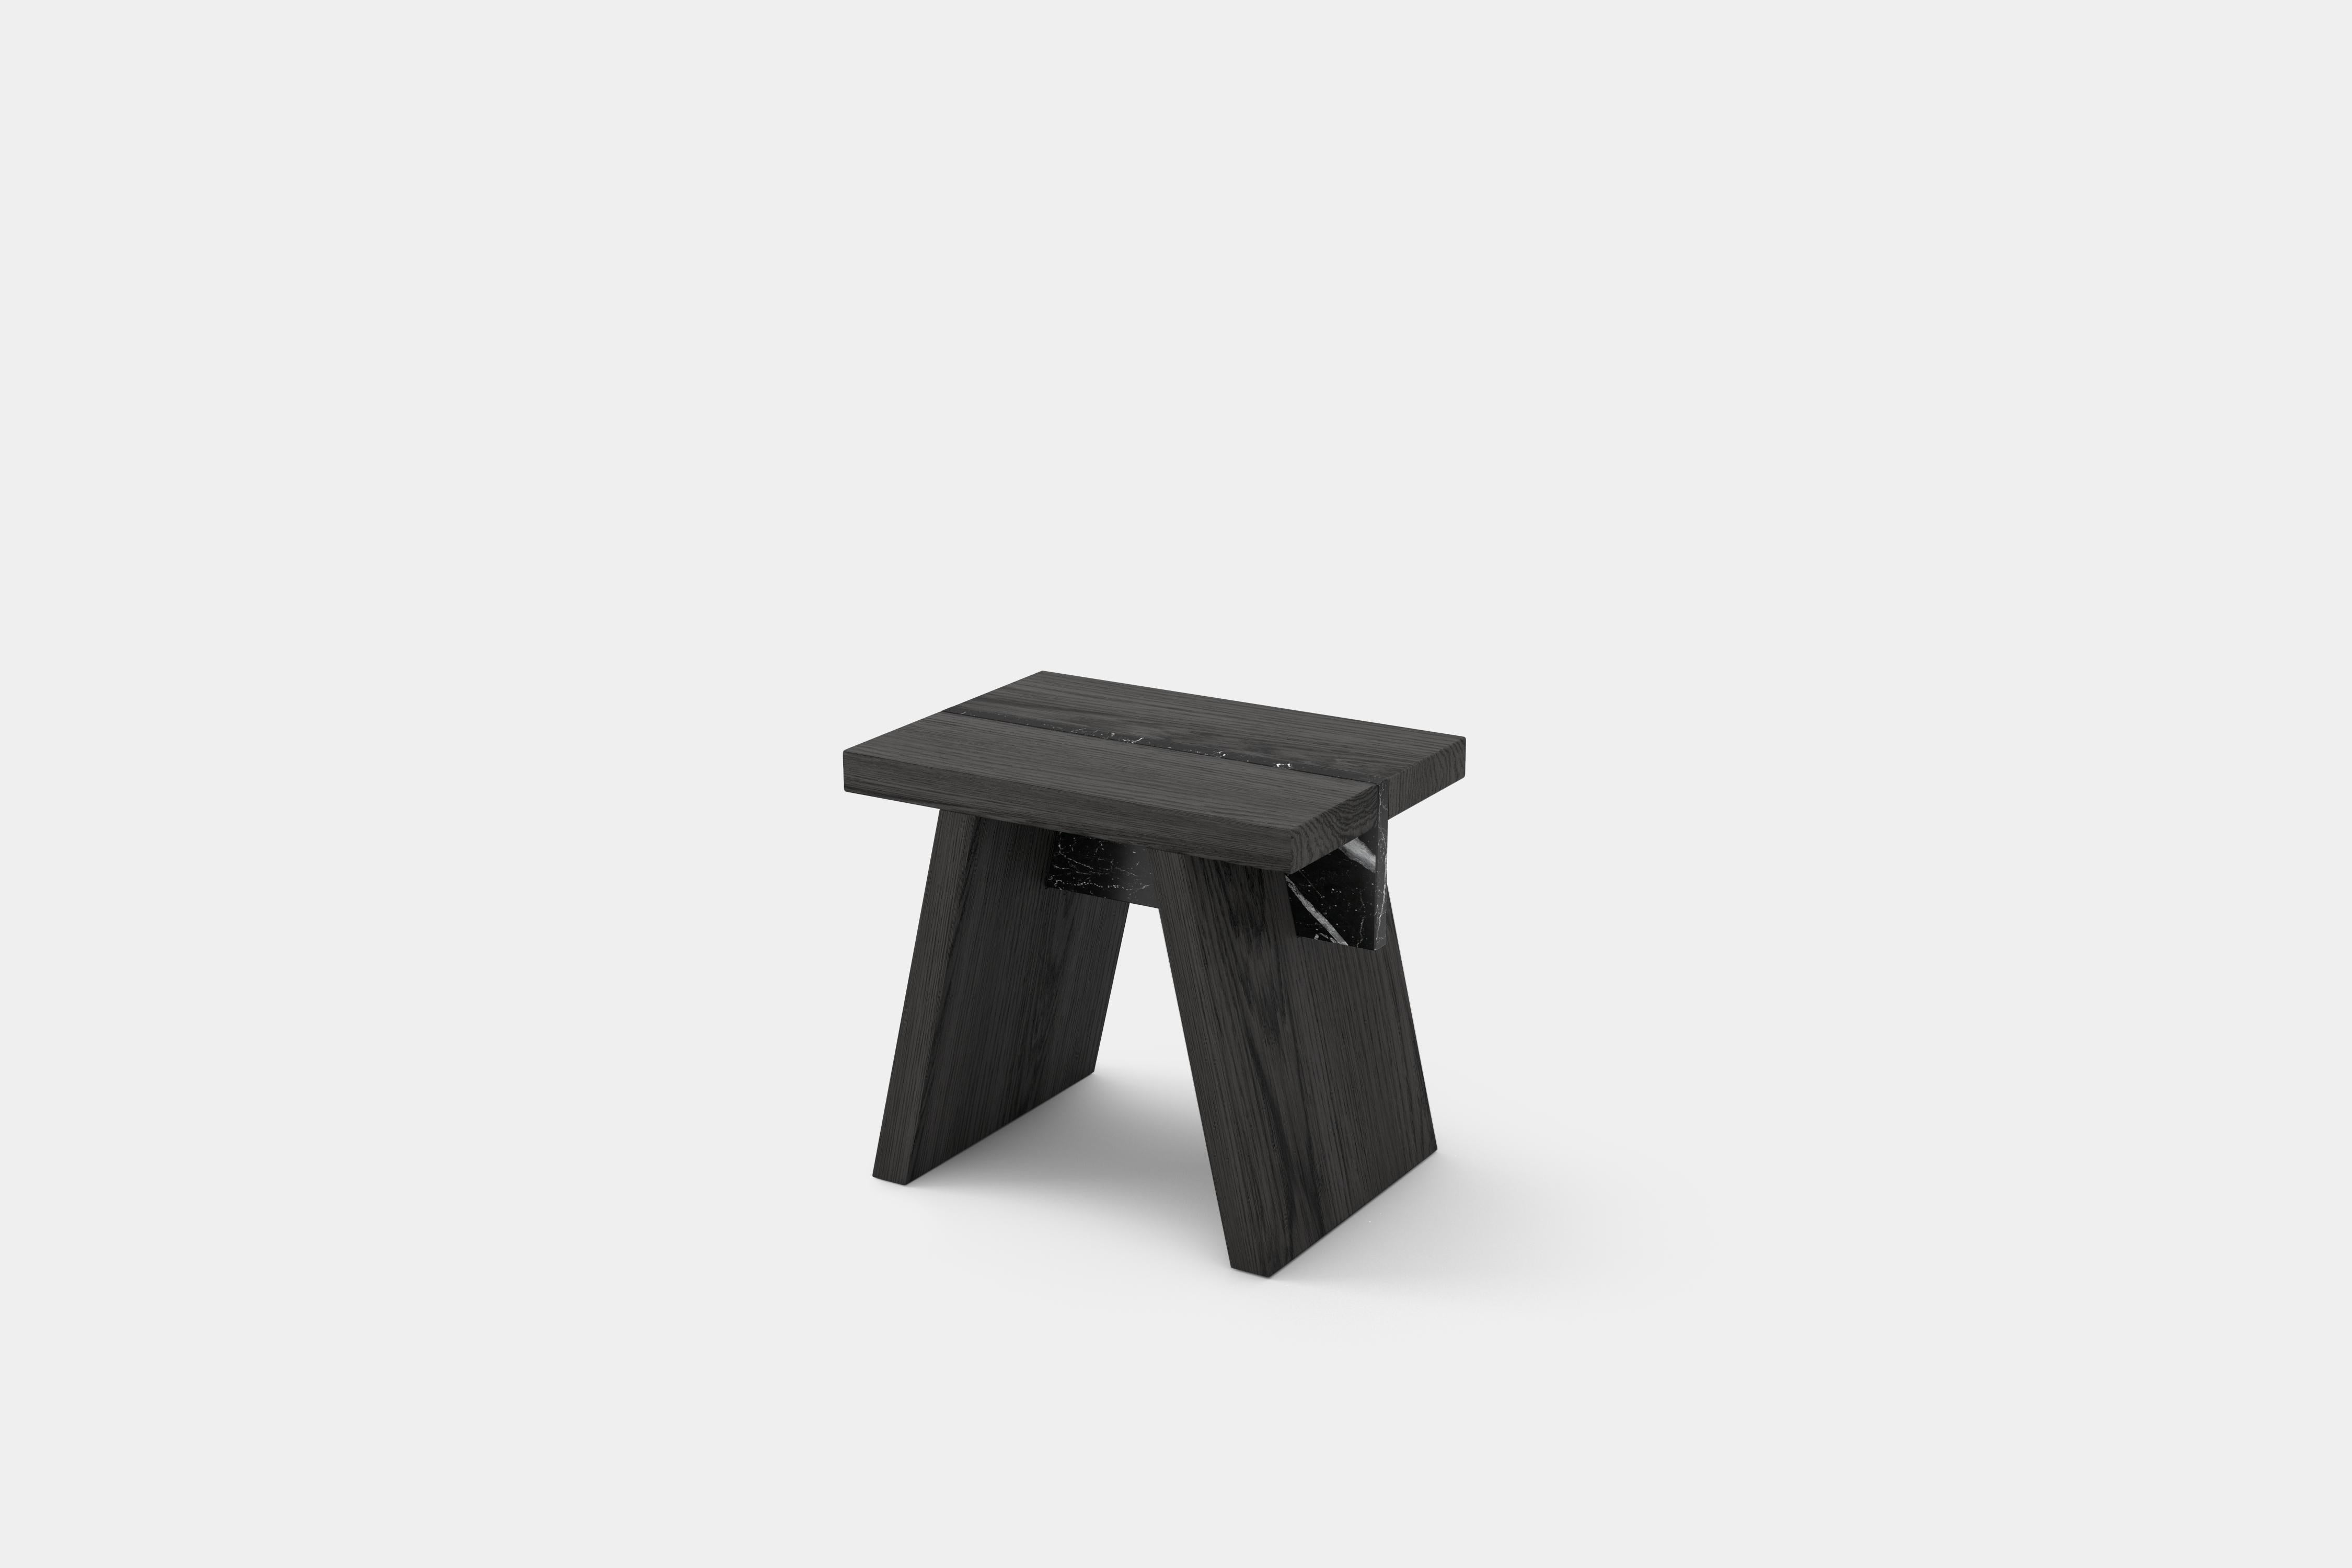 Laws of Motion, Black Solid Wood Stool, Side Table by Joel Escalona

Laws of Motion is a furniture collection that through a series of different typologies explores concepts like force, gravity and movement. Each of these functional sculptures